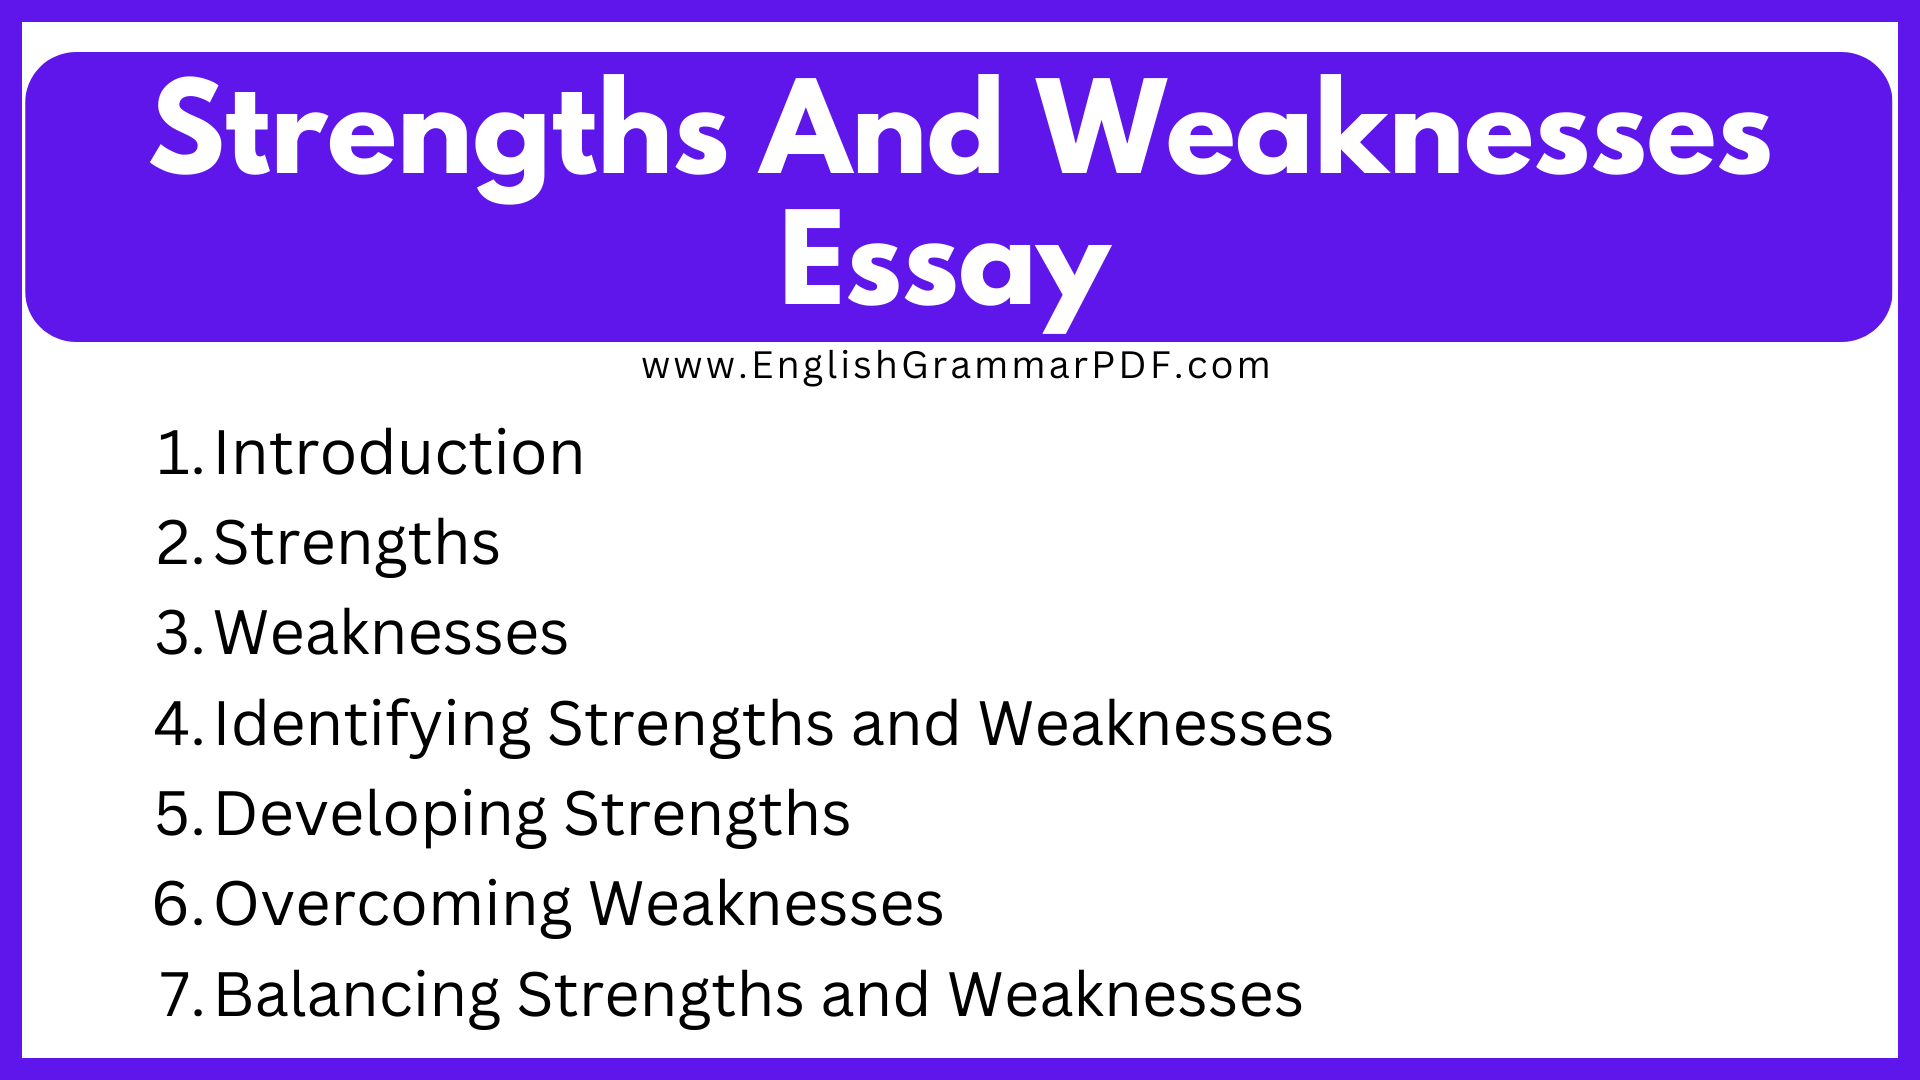 Strengths And Weaknesses Essay